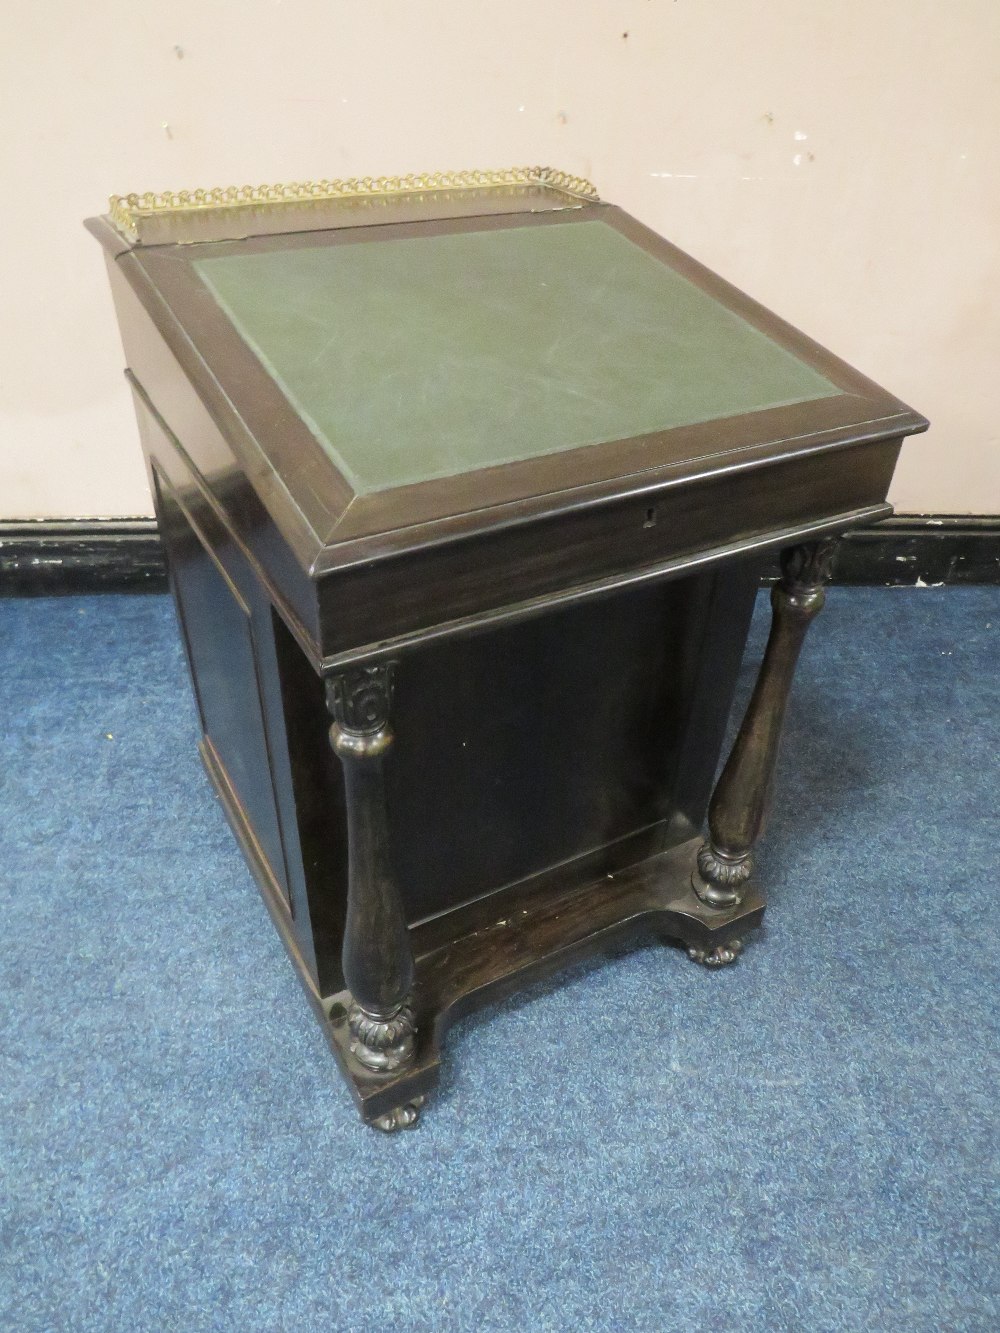 A 19TH CENTURY COLONIAL EBONY DAVENPORT DESK IN THE MANNER OF GILLOWS, the slope with brass gallery